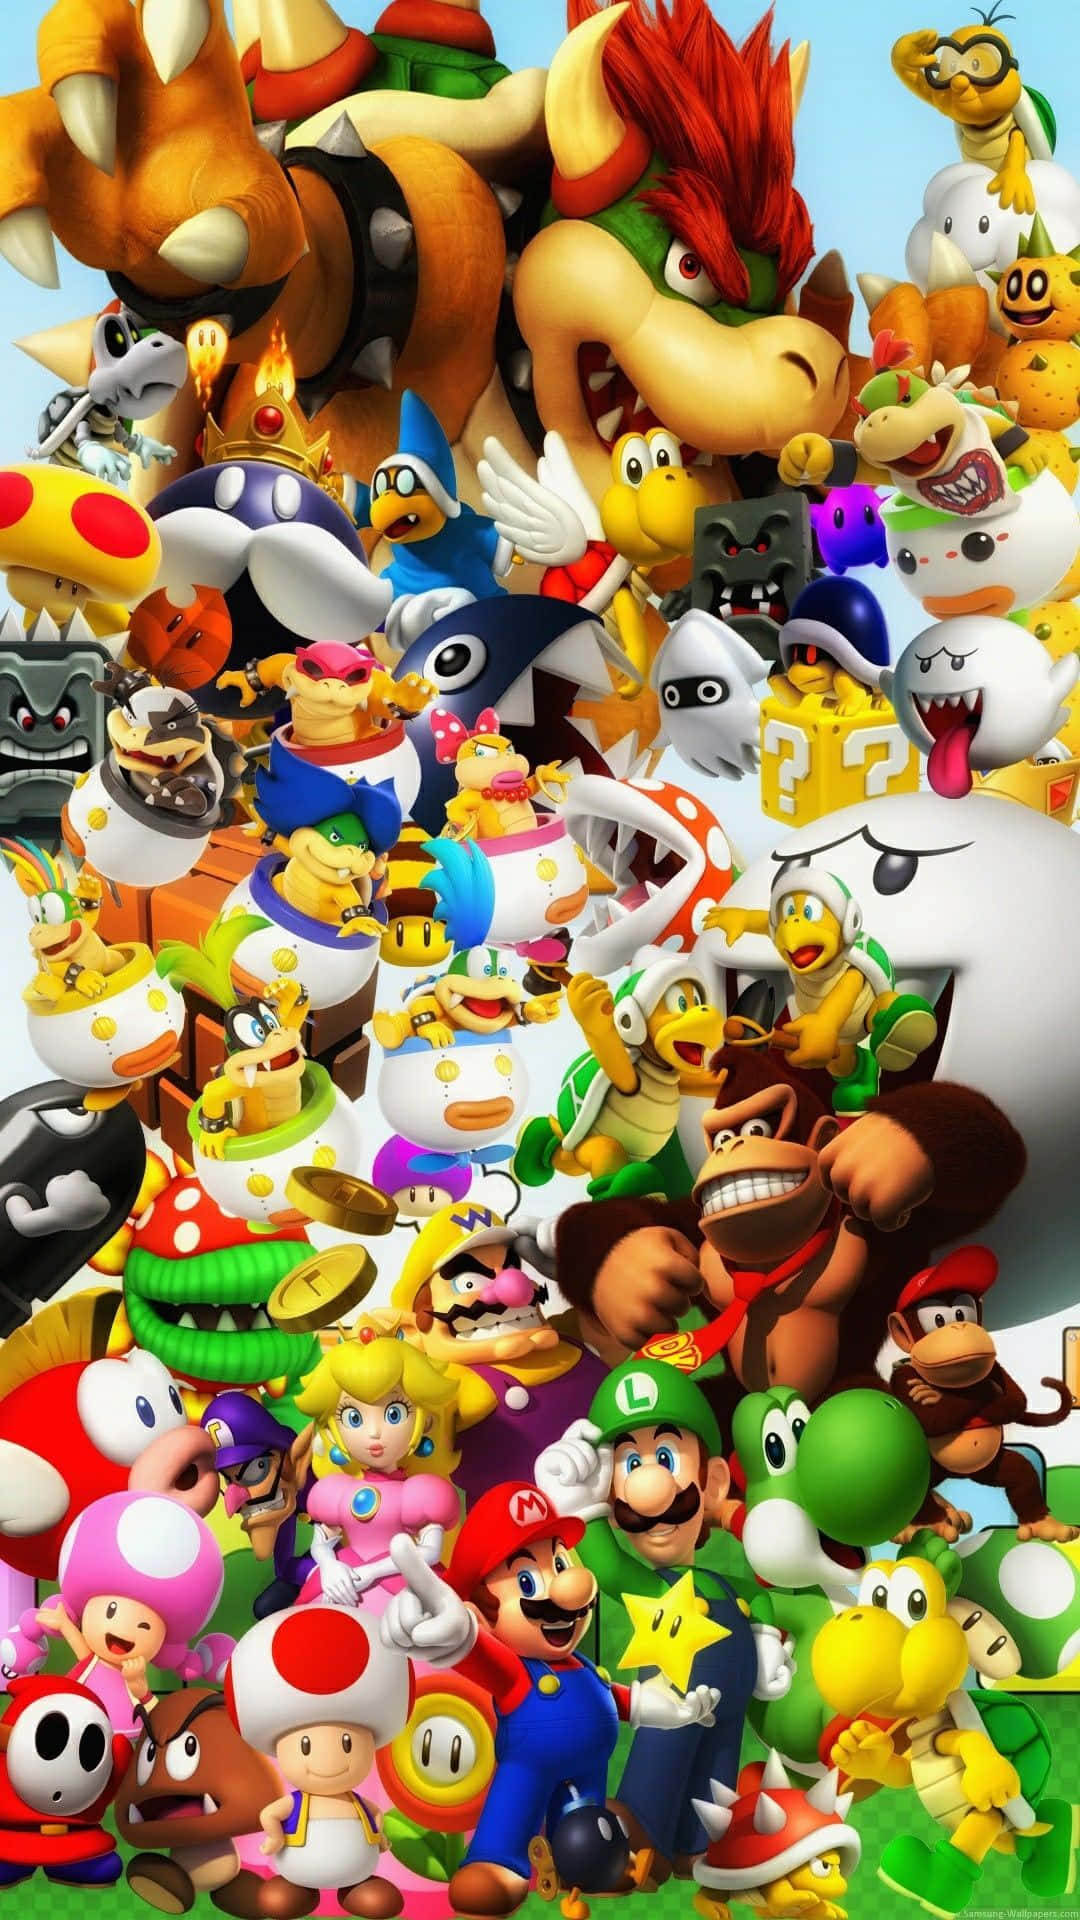 All Characters From Super Mario Iphone Wallpaper